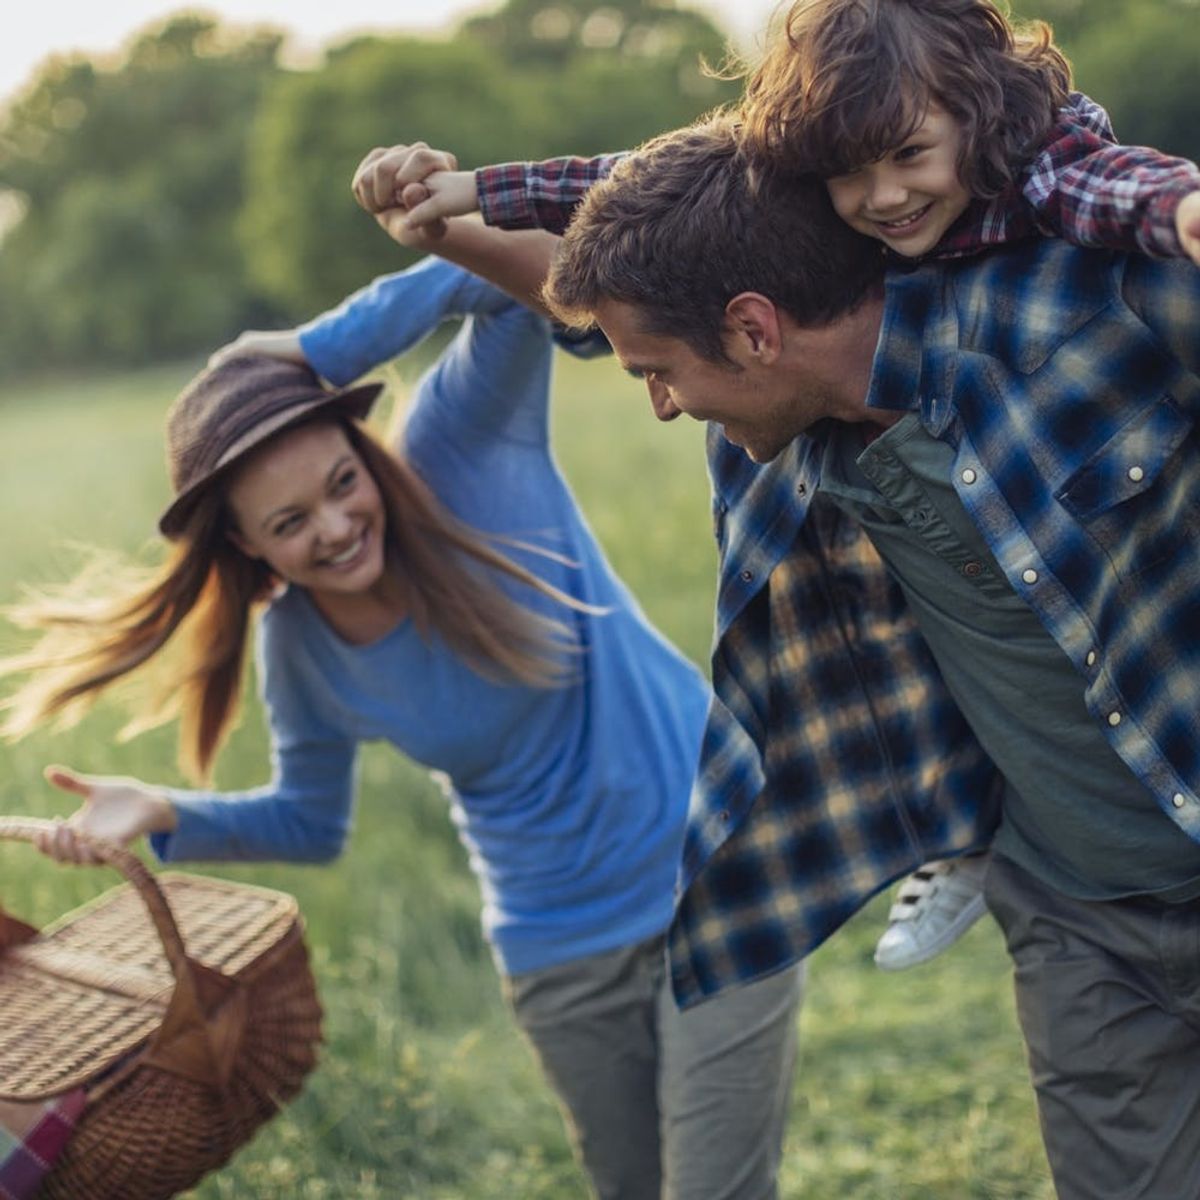 5 Tips to Have the Best Family Picnic Ever